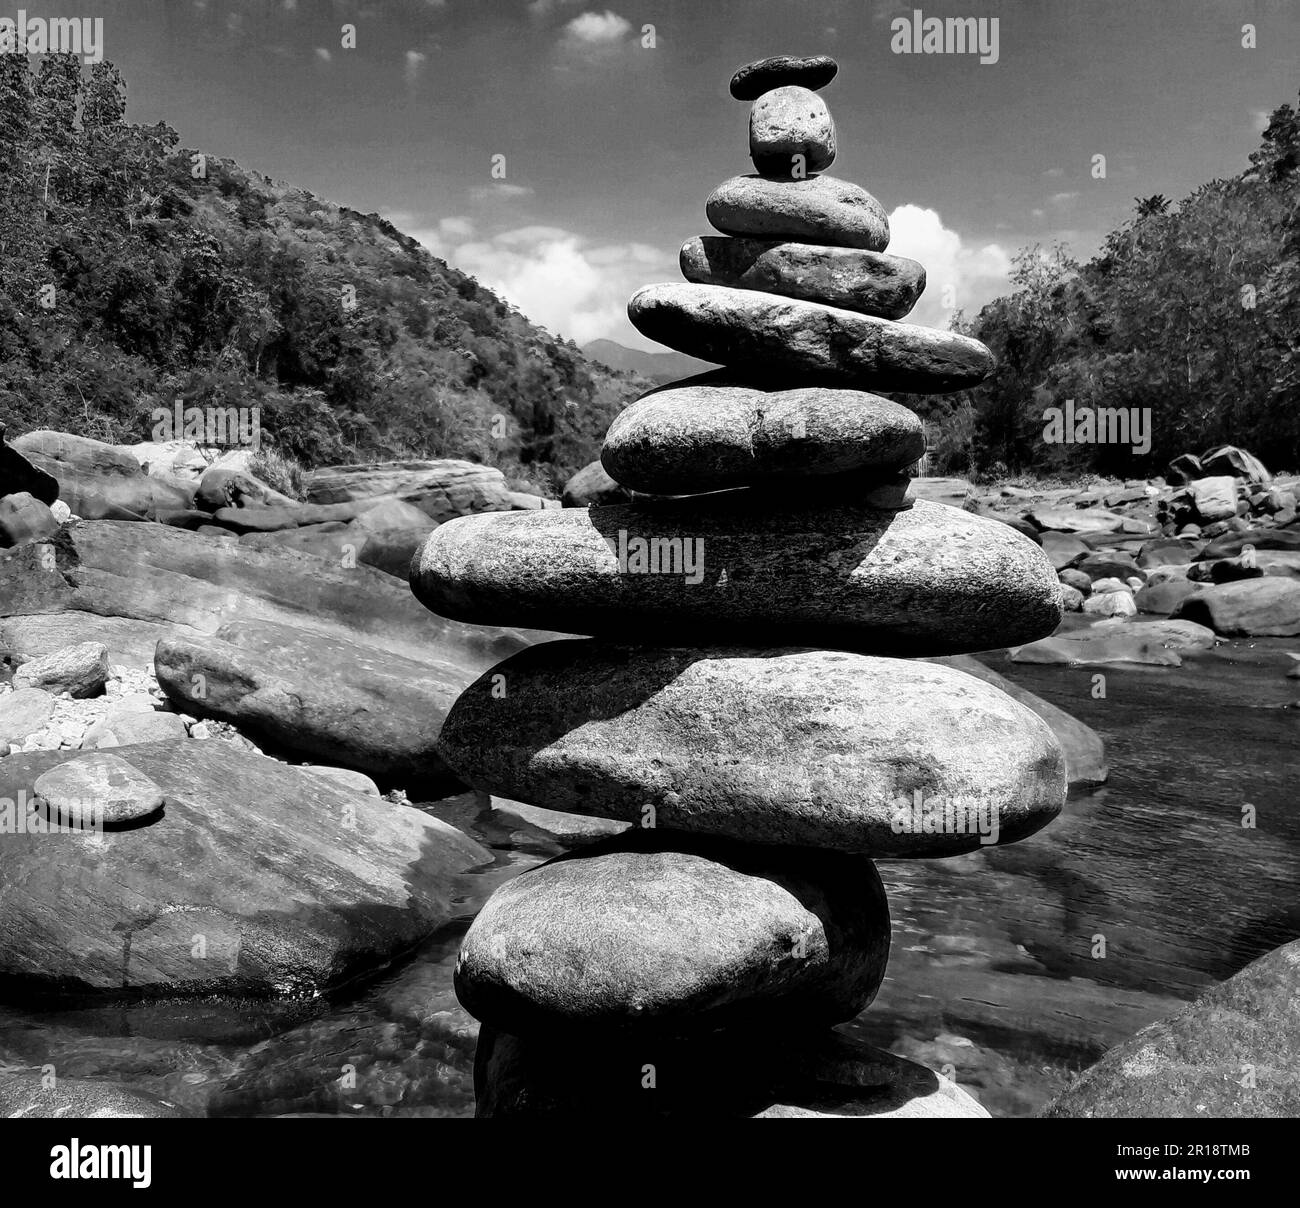 Pile of stones in a lake background. Close-up shot of a stone balance. Black and White Stock Photo